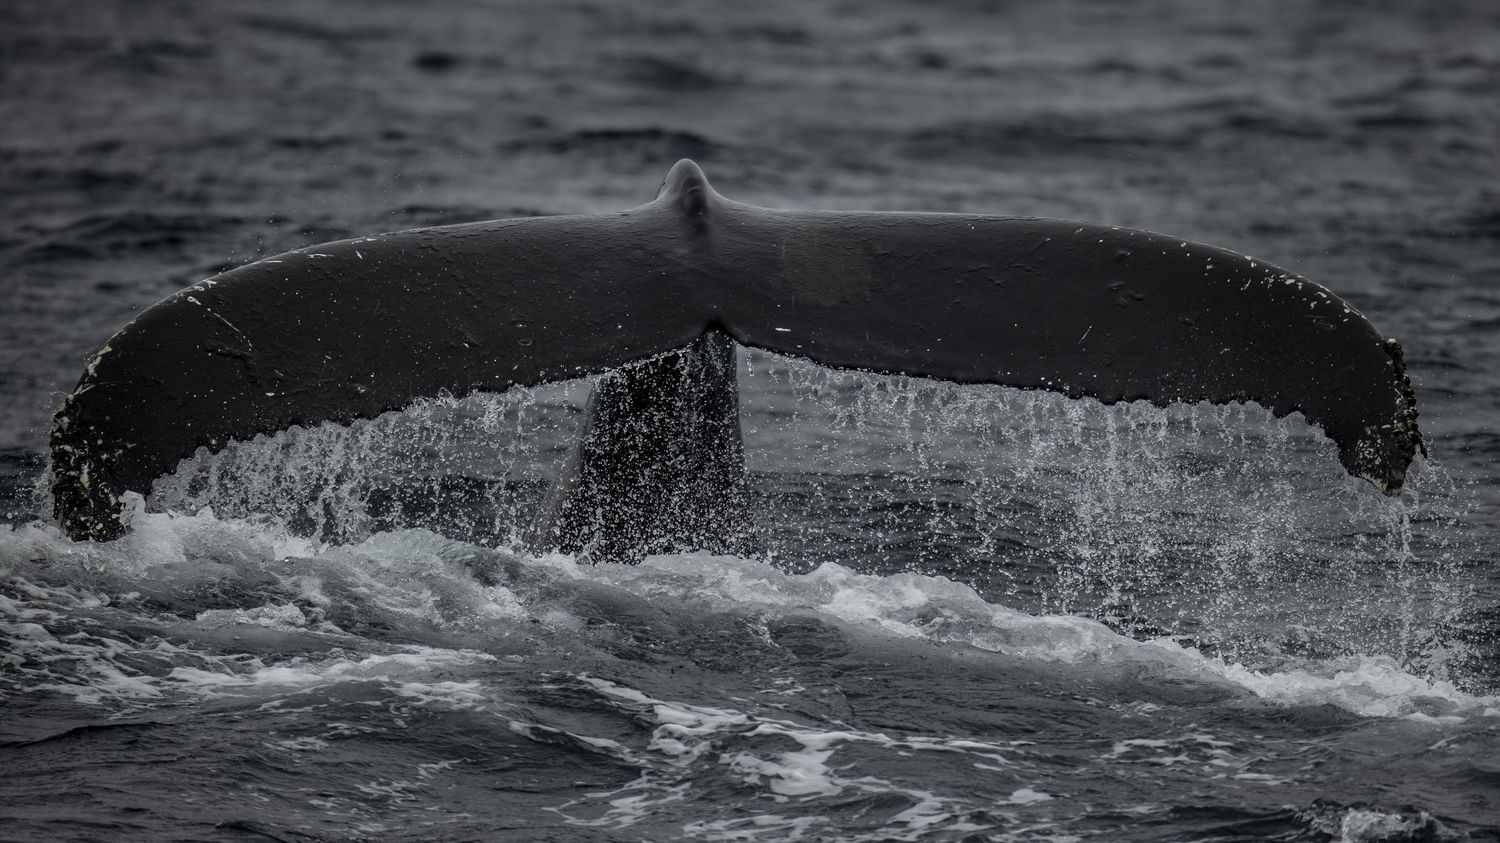 Norway: a controversial research project on whales suspended after the drowning of a cetacean
